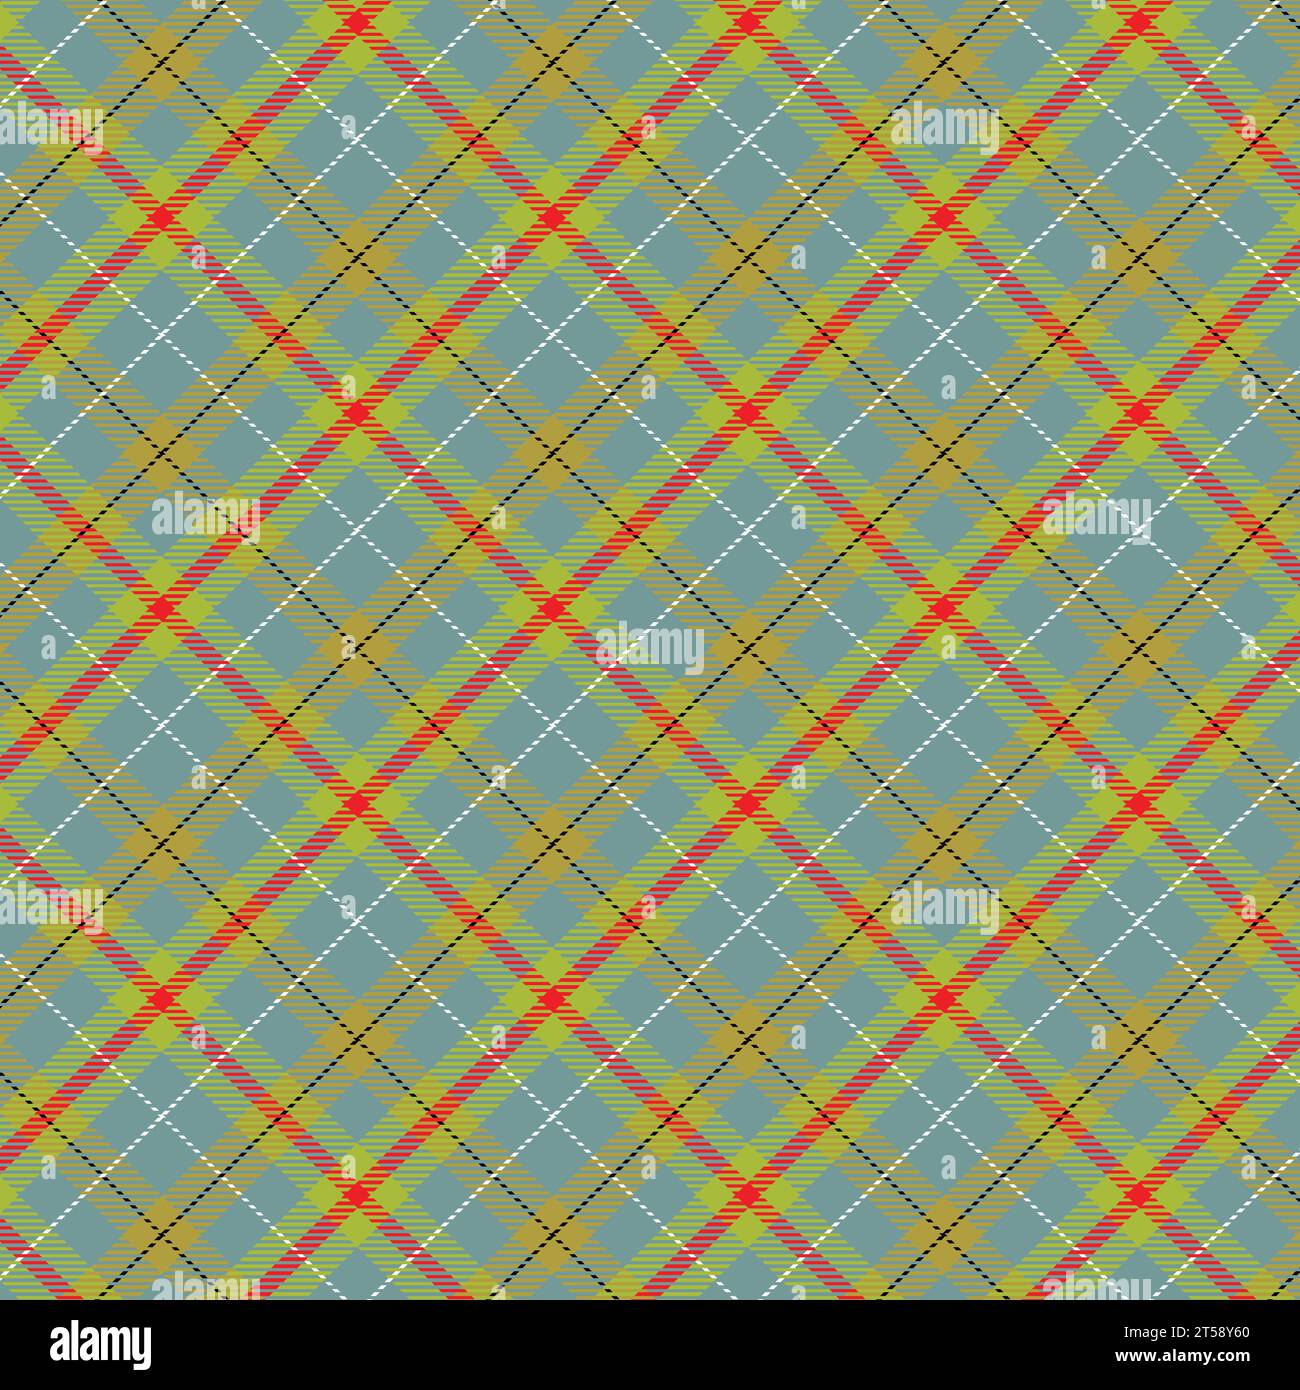 continuous pattern in cloth tartan vector Stock Vector